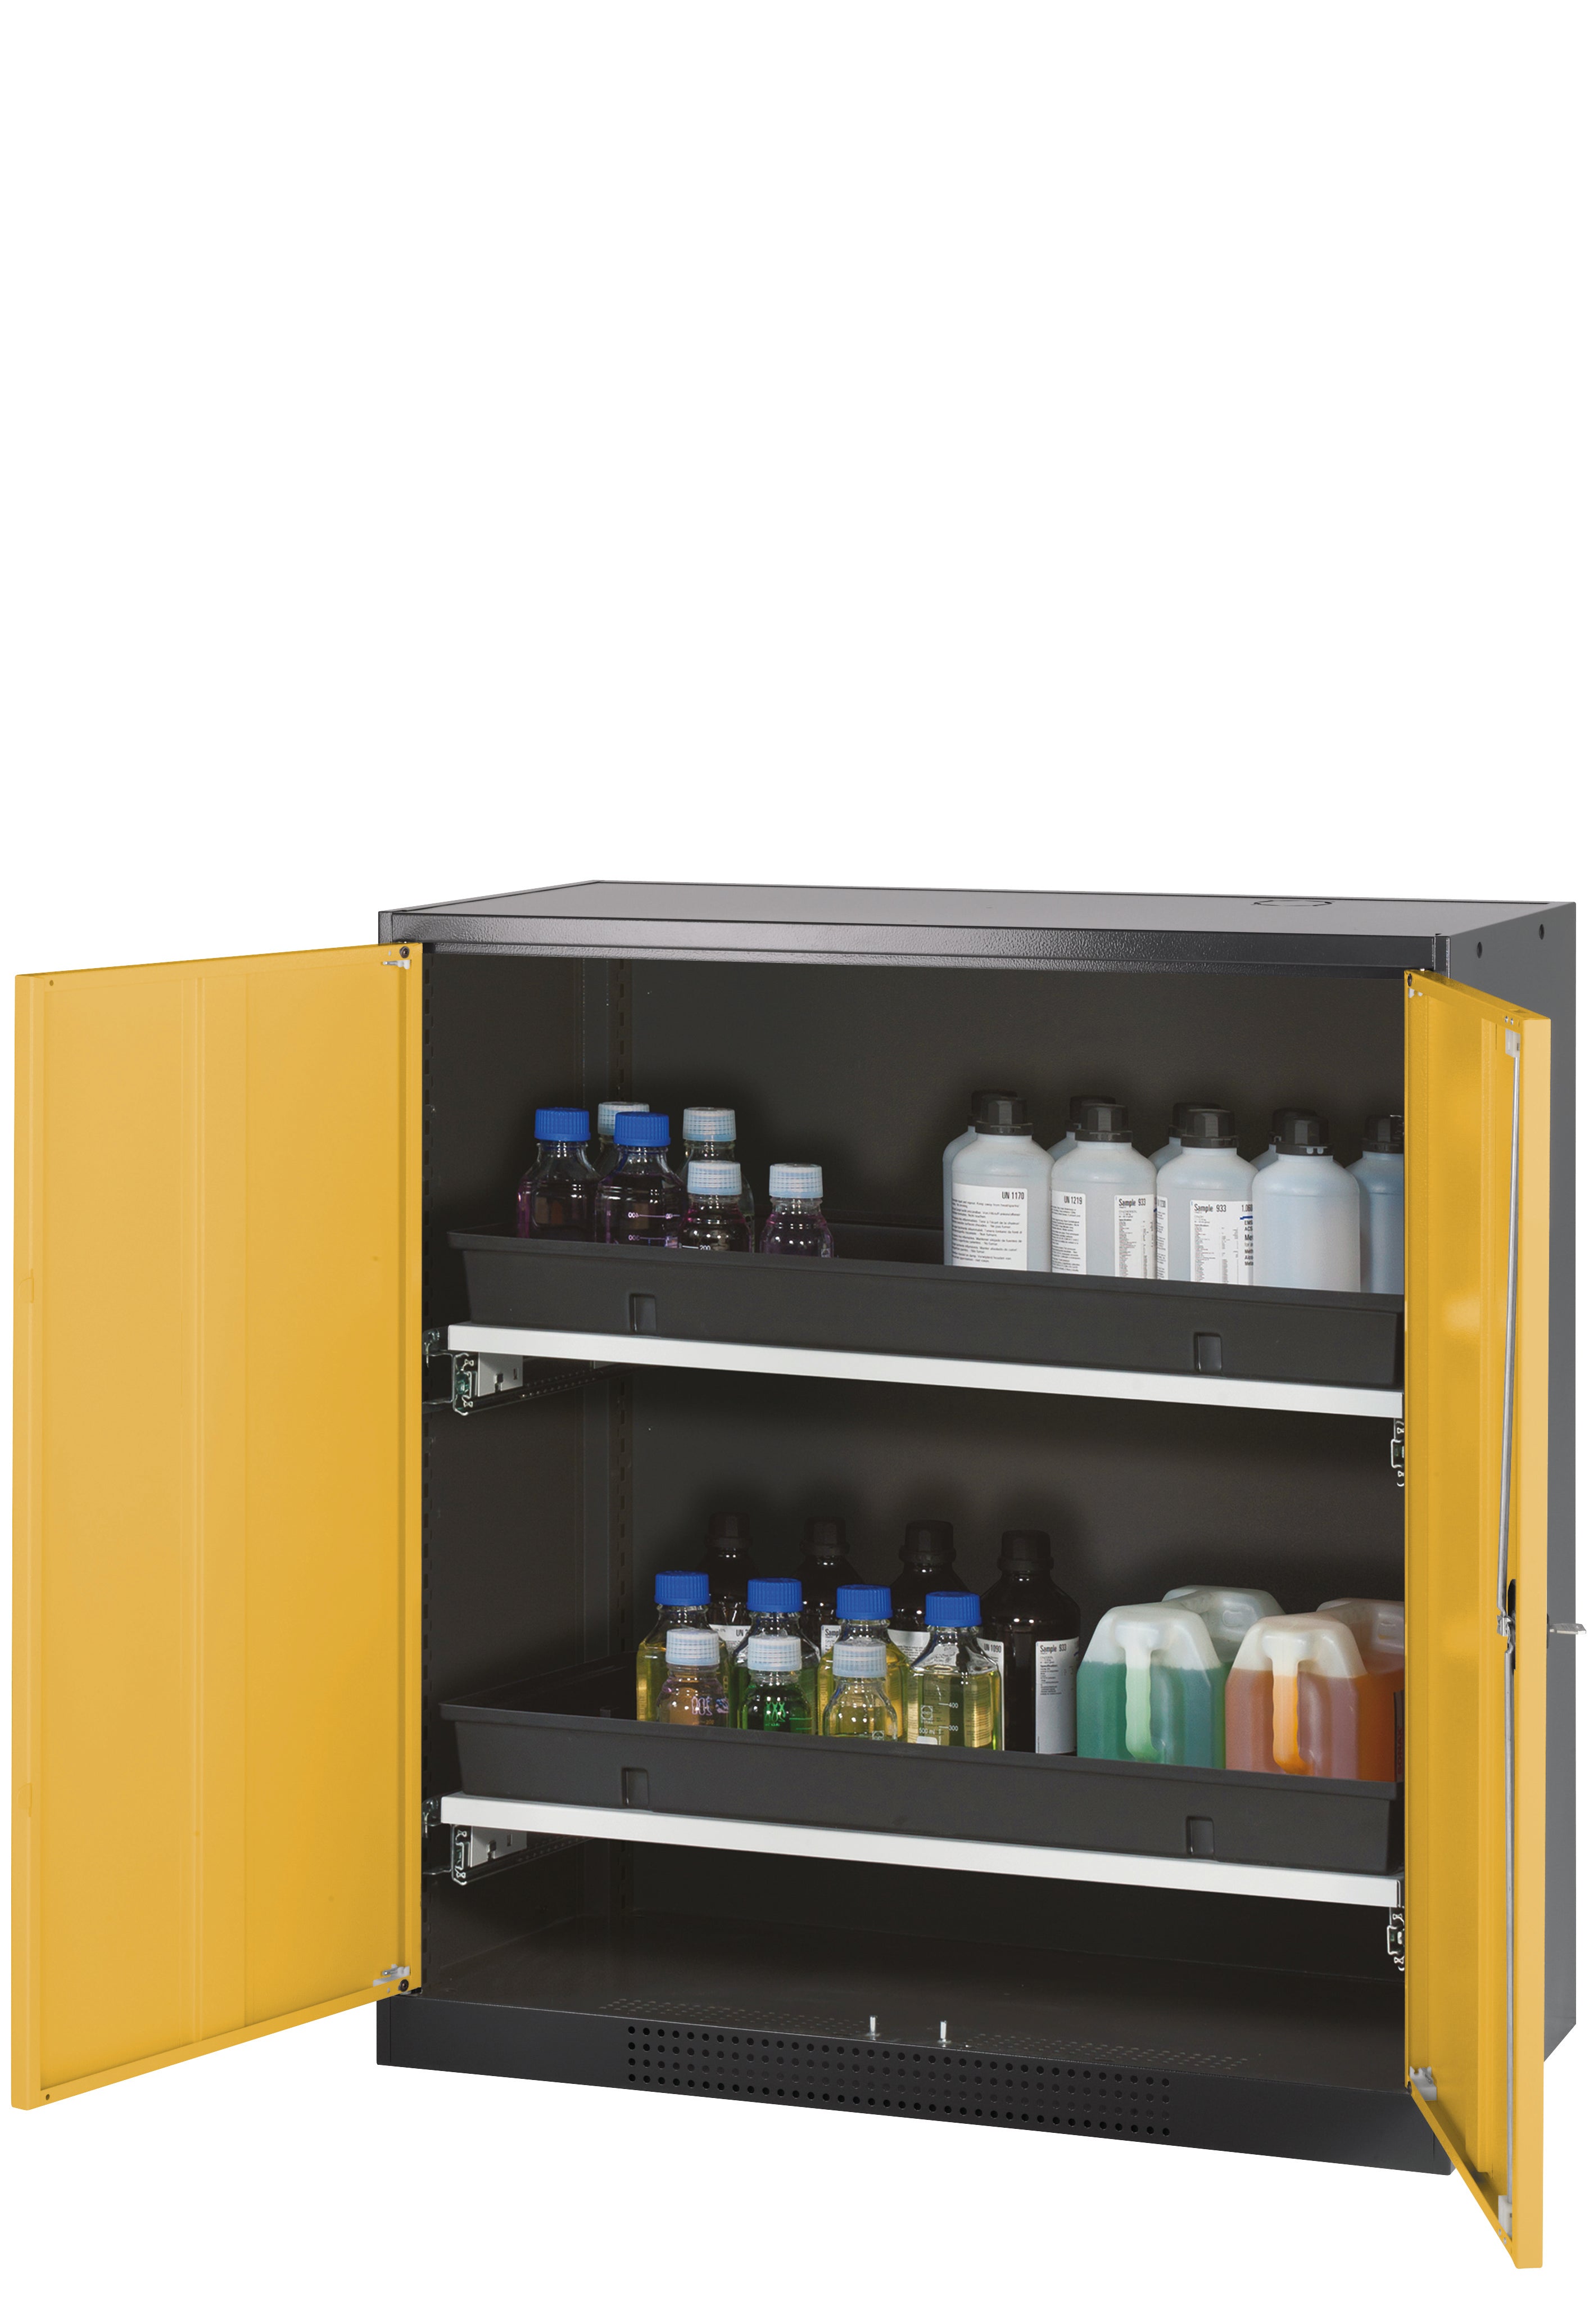 Chemical cabinet CS-CLASSIC model CS.110.105 in safety yellow RAL 1004 with 2x AbZ pull-out shelves (sheet steel/polypropylene)